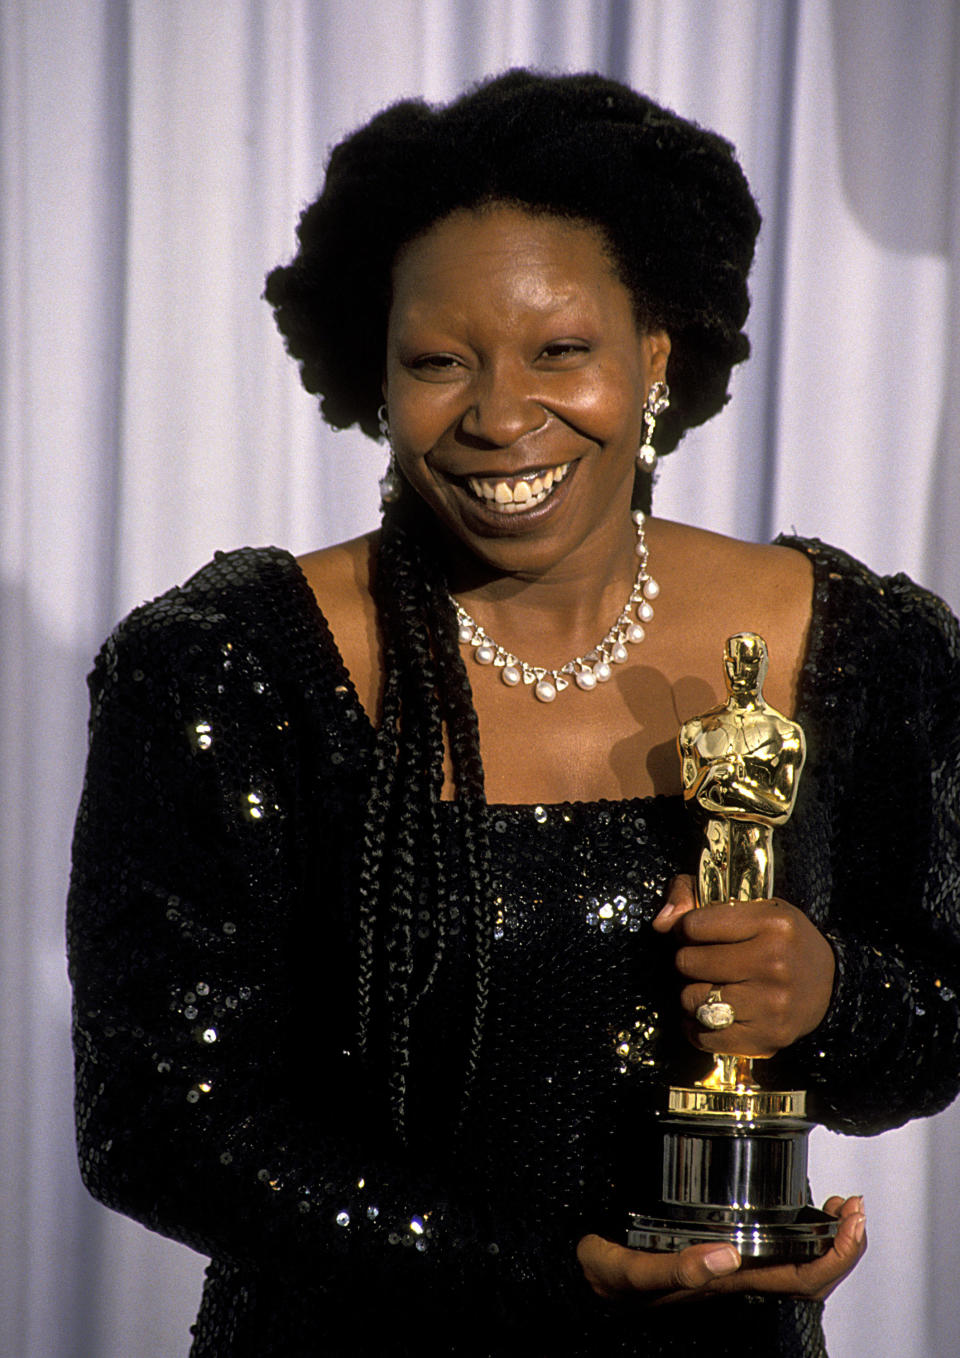 Whoopi Goldberg, with her Oscar for best supporting actress, at the 63rd Annual Academy Awards on March 25, 1991. / Credit: Ron Galella/Ron Galella Collection via Getty Images